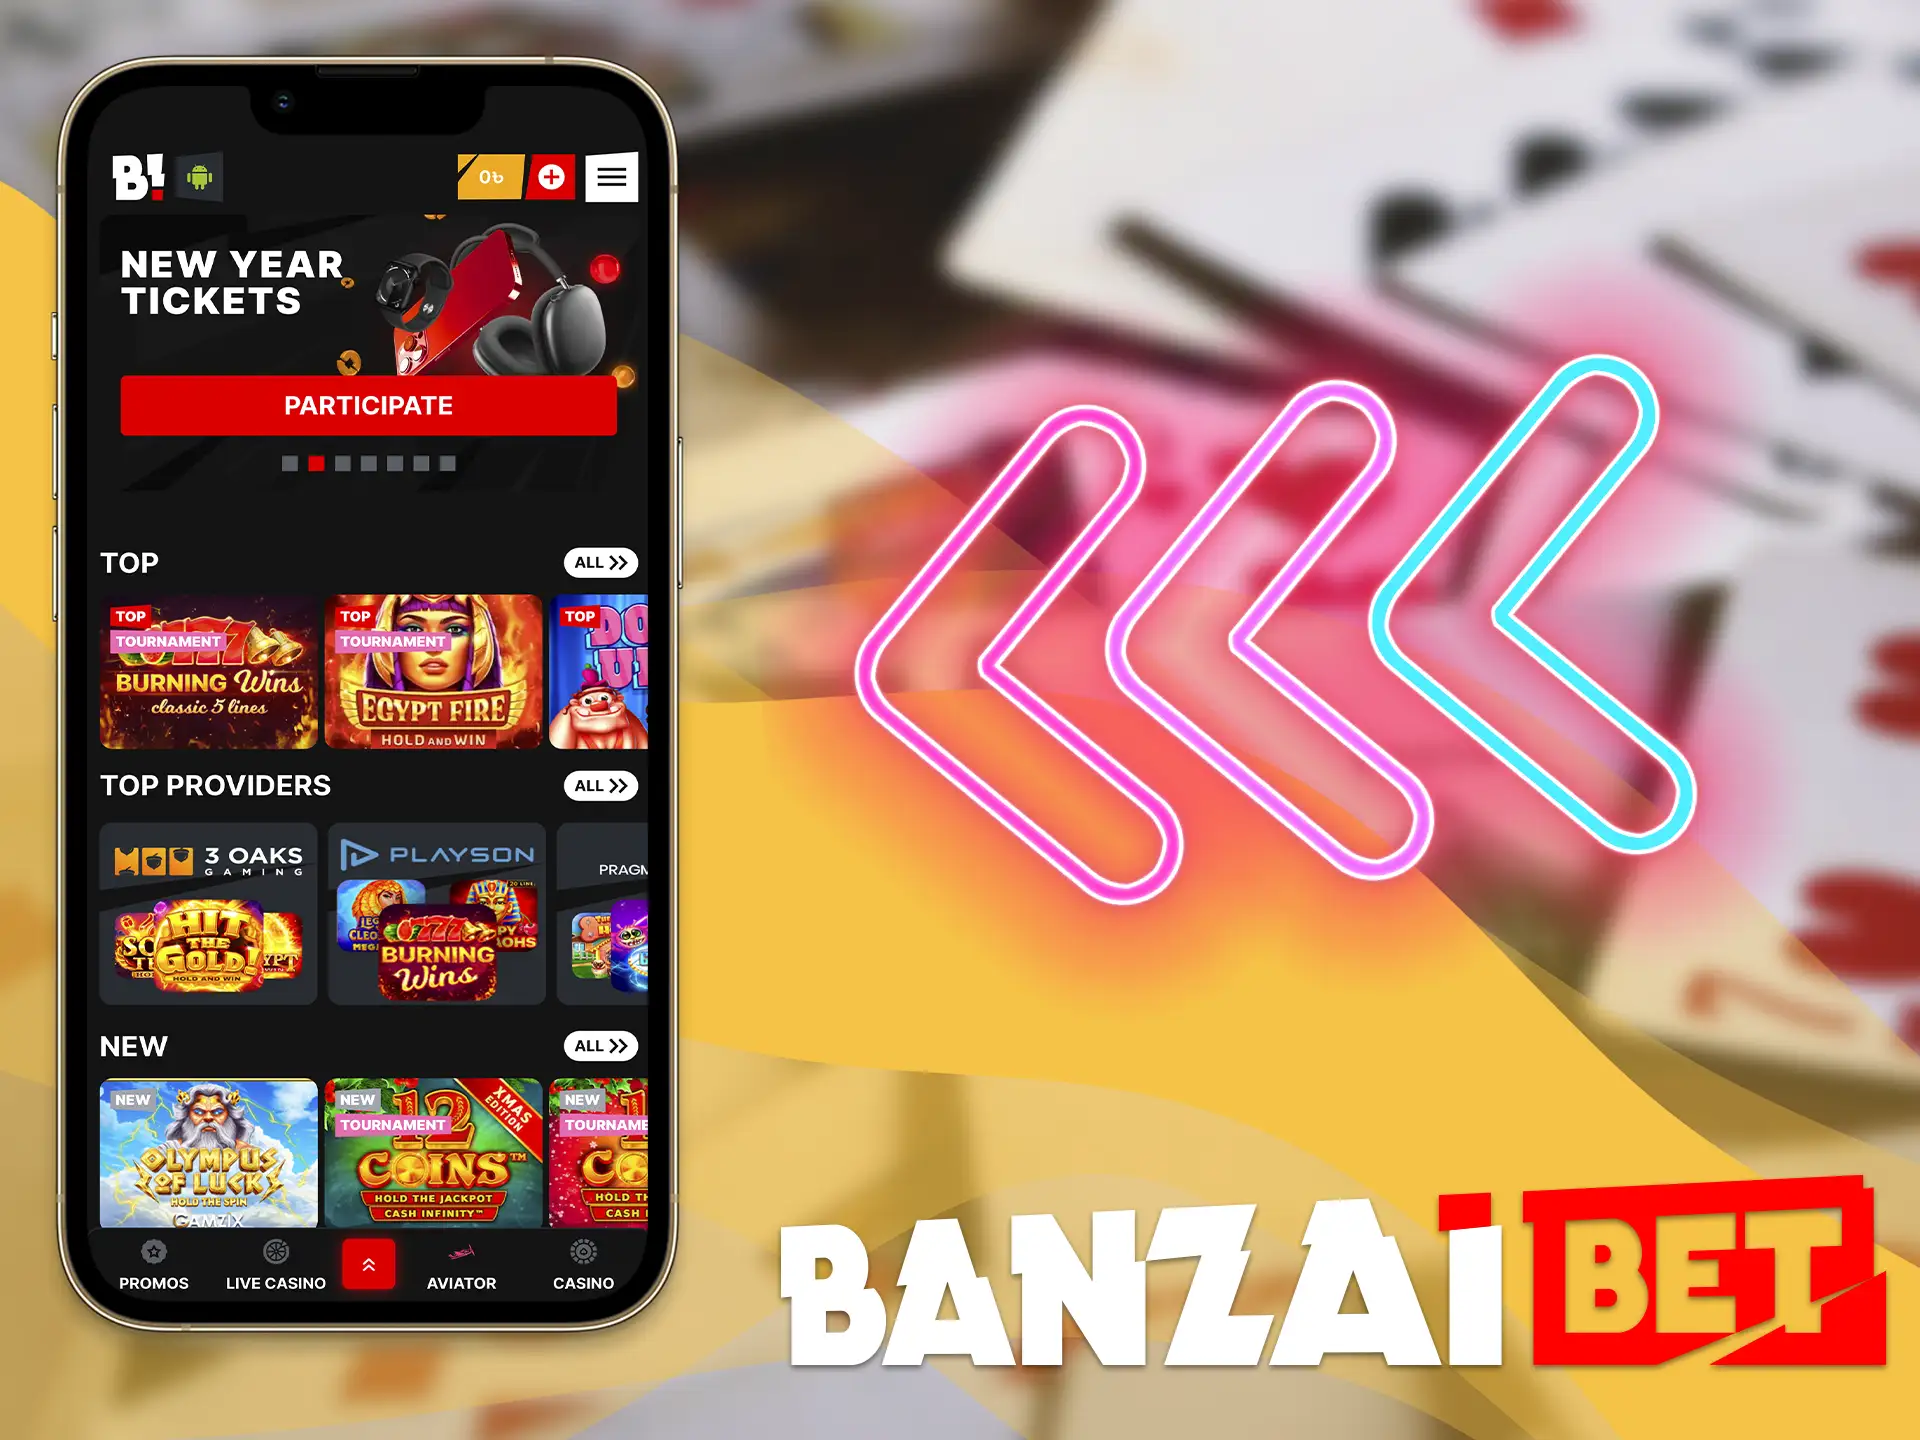 Get access to the gambling section after installing the Banzai App on your smartphone.